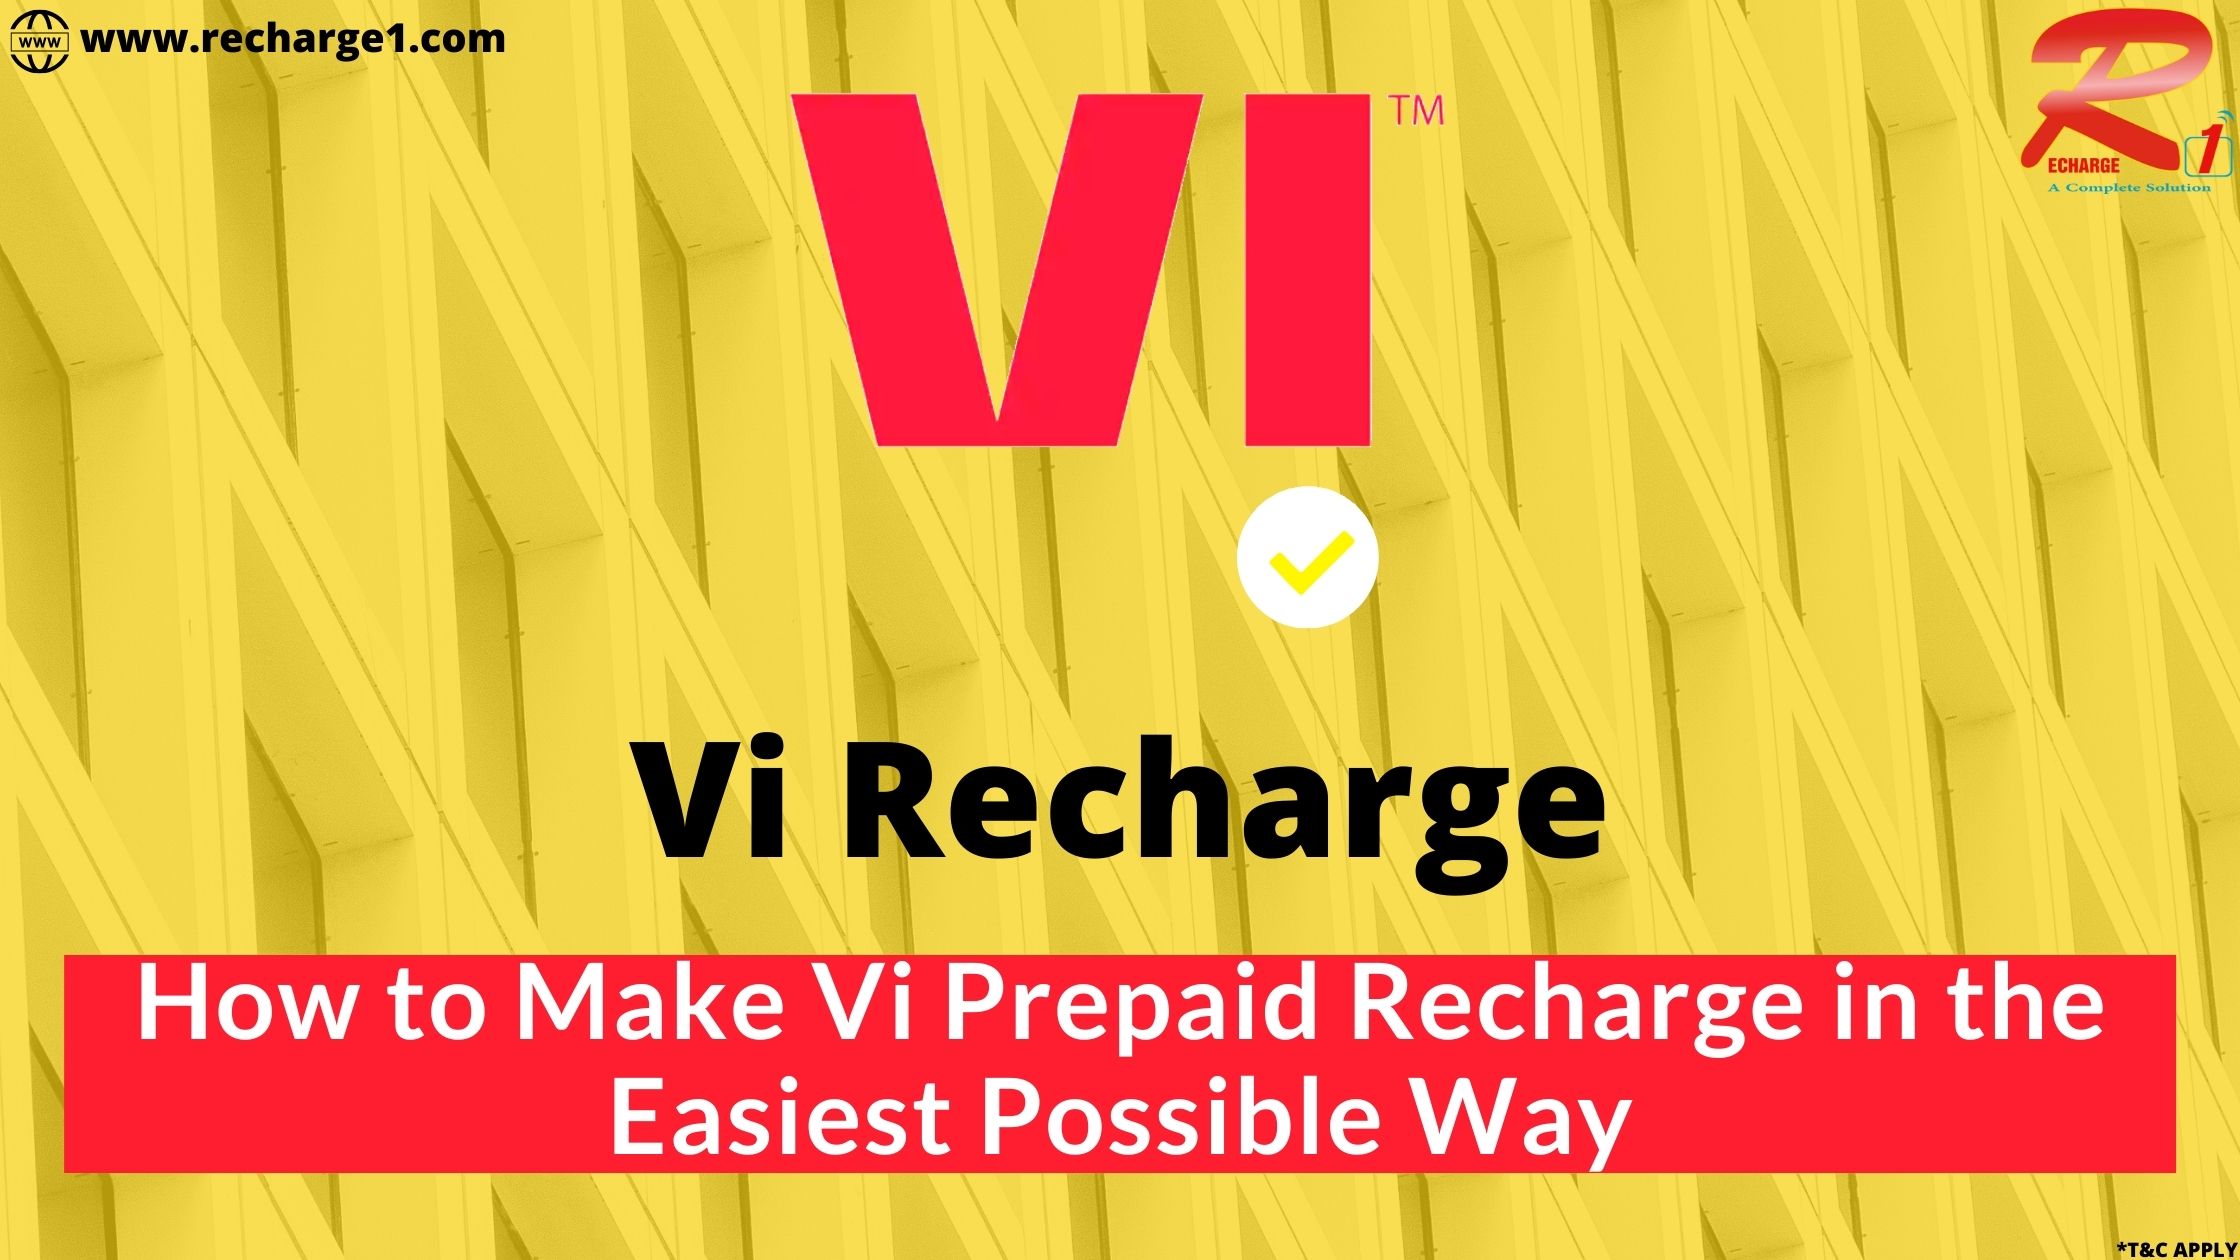  Vi Recharge: How to Make Vi Prepaid Recharge in the Easiest Possible Way?